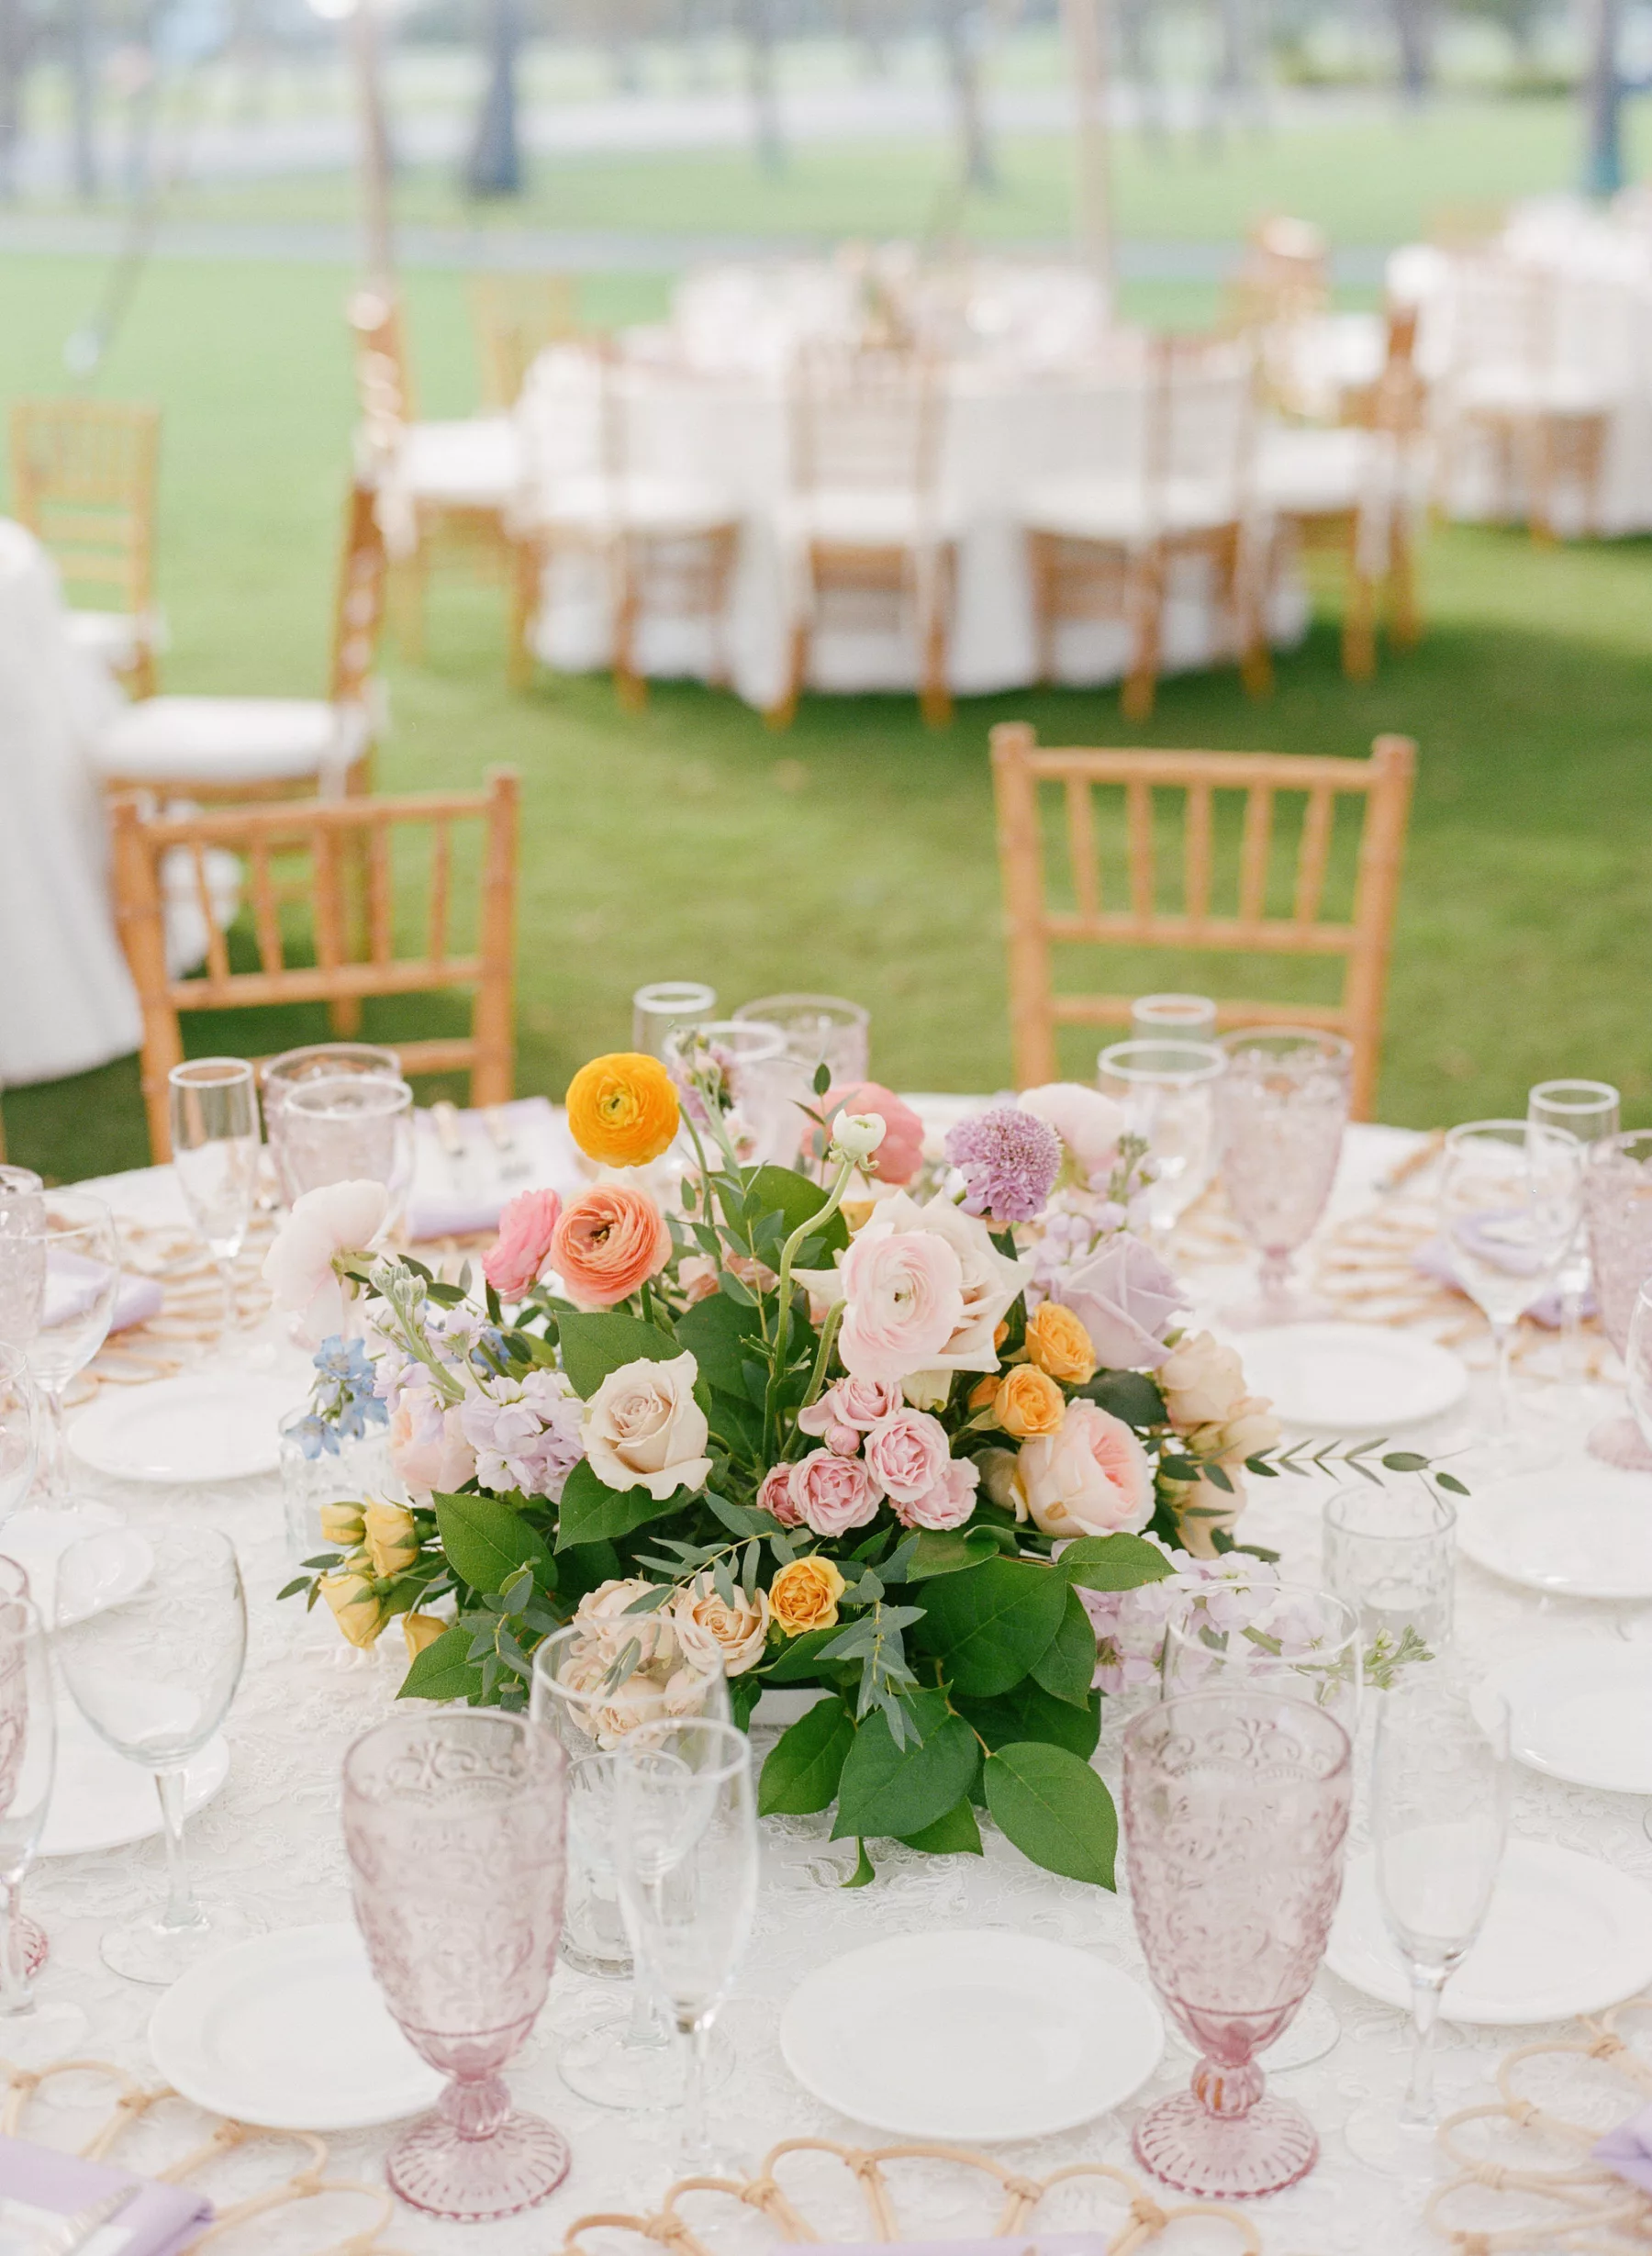 Pastel Yellow and Pink Ranunculus, White Roses, and Greenery Centerpiece Decor Inspiration for Luxurious Old Florida Wedding Reception